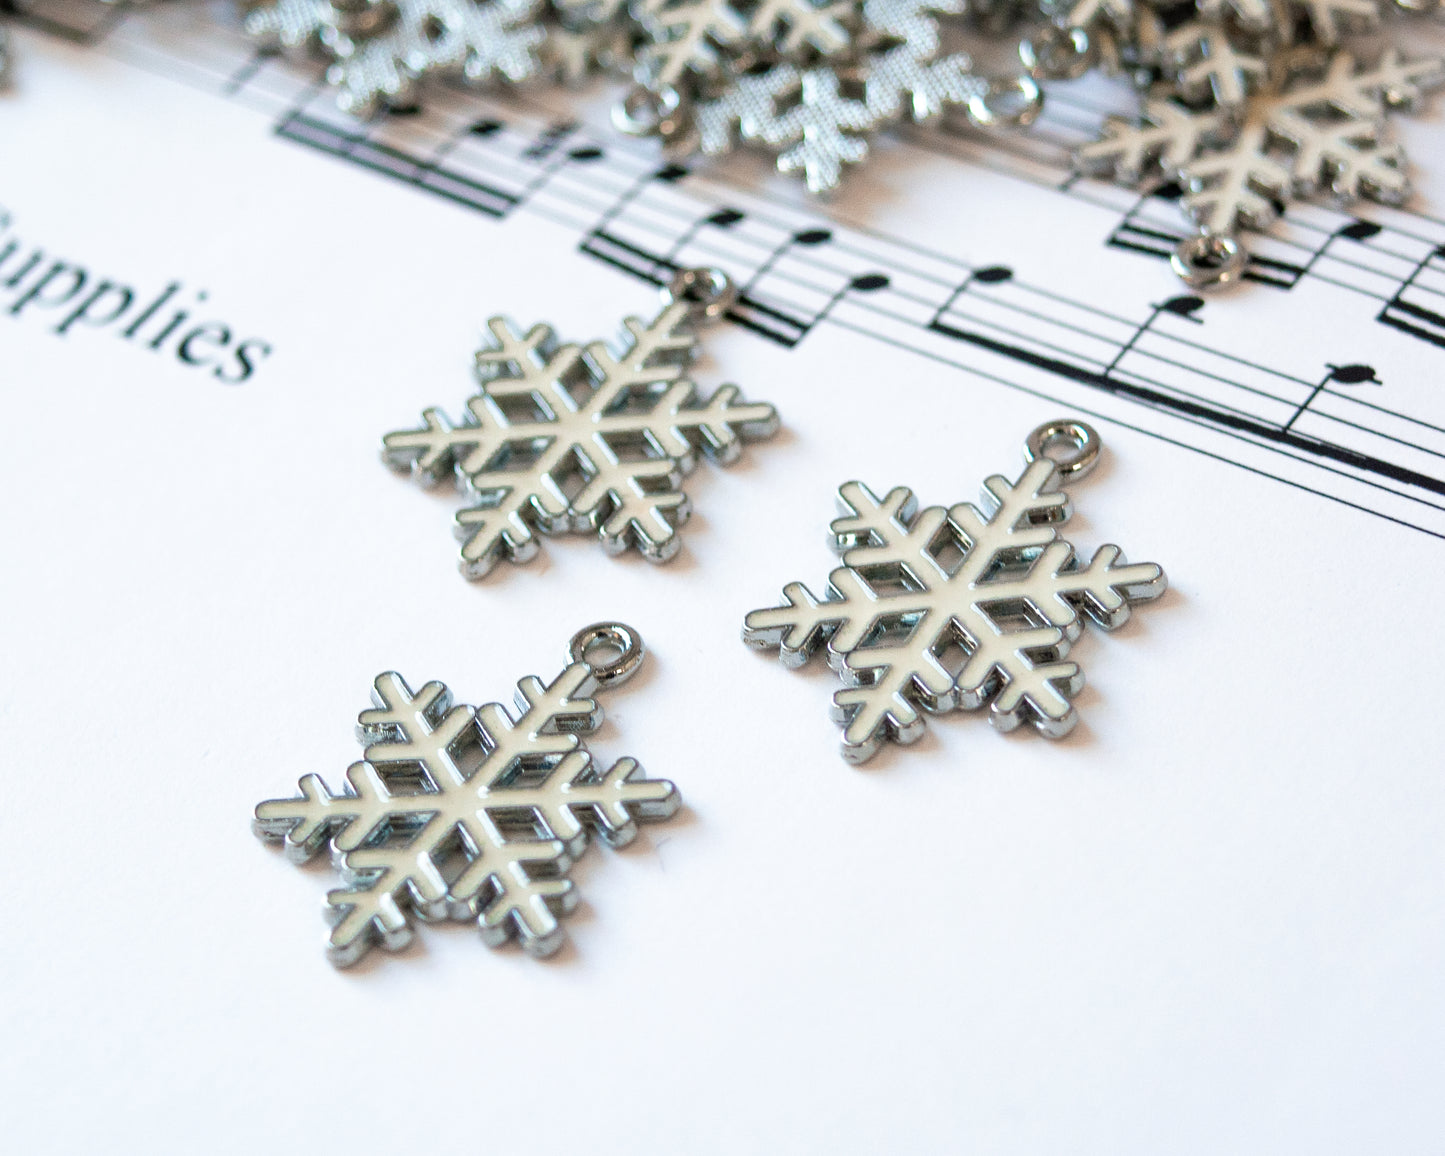 Snowflake Charms with White Enamel, 25mm Long, Platinum Colored Metal